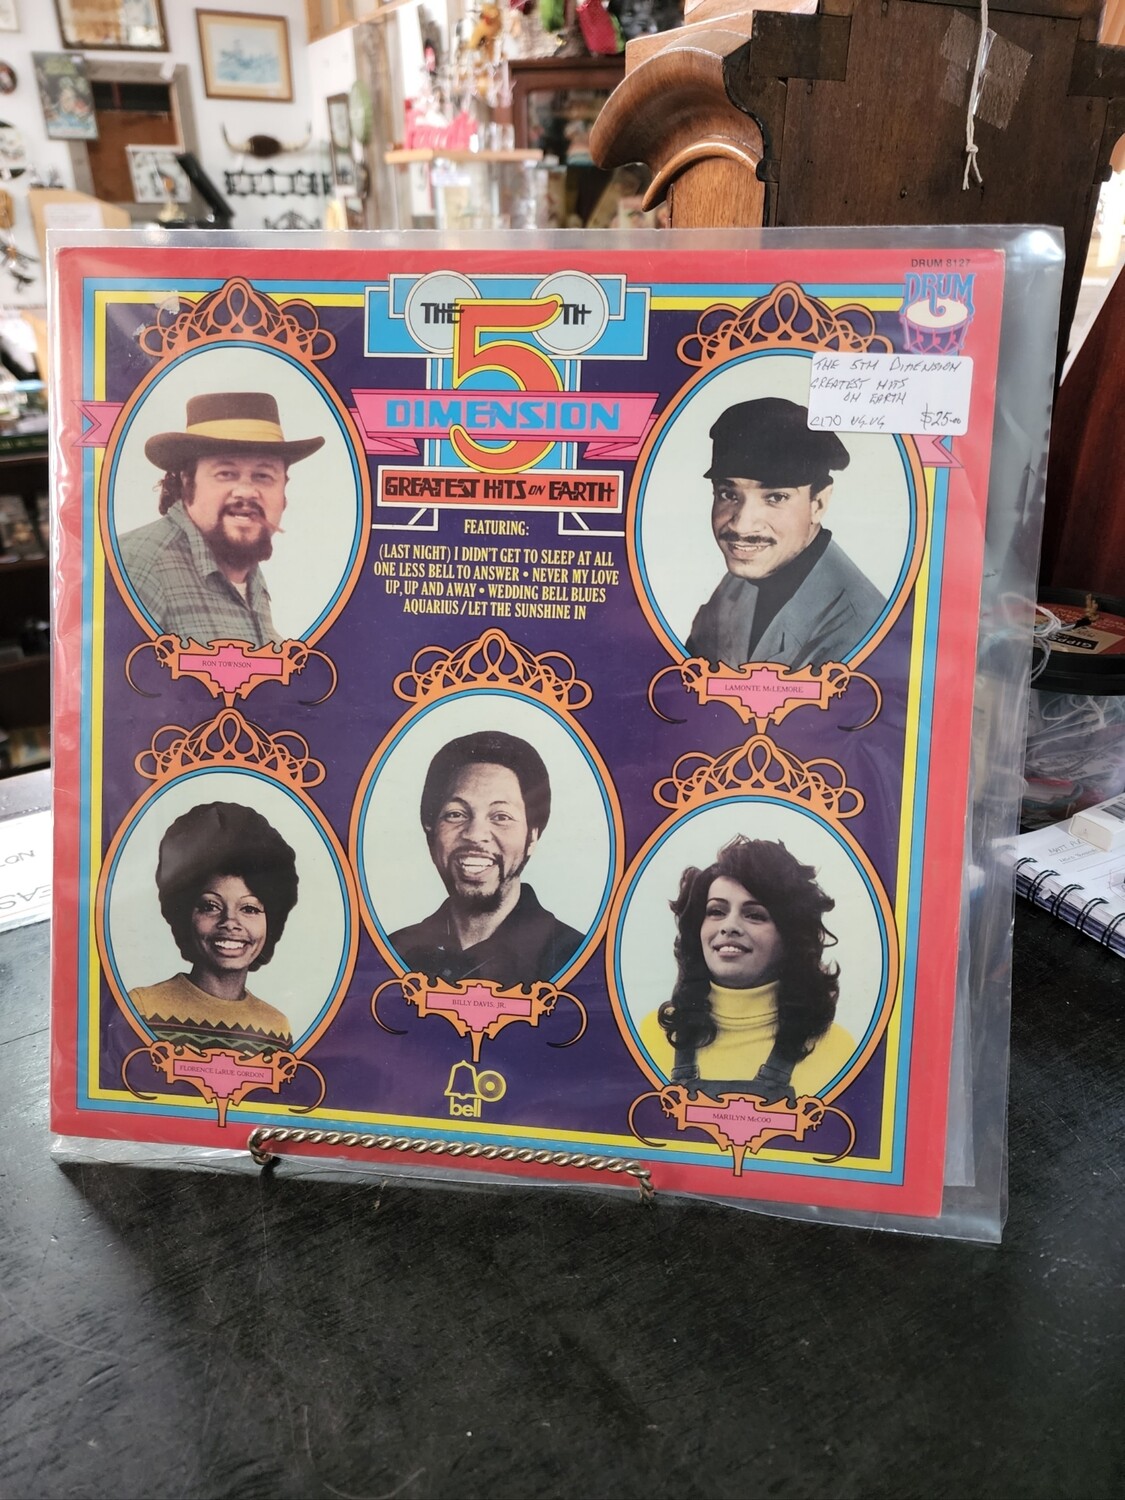 THE 5TH DIMENSION GREATEST HITS ON EARTH